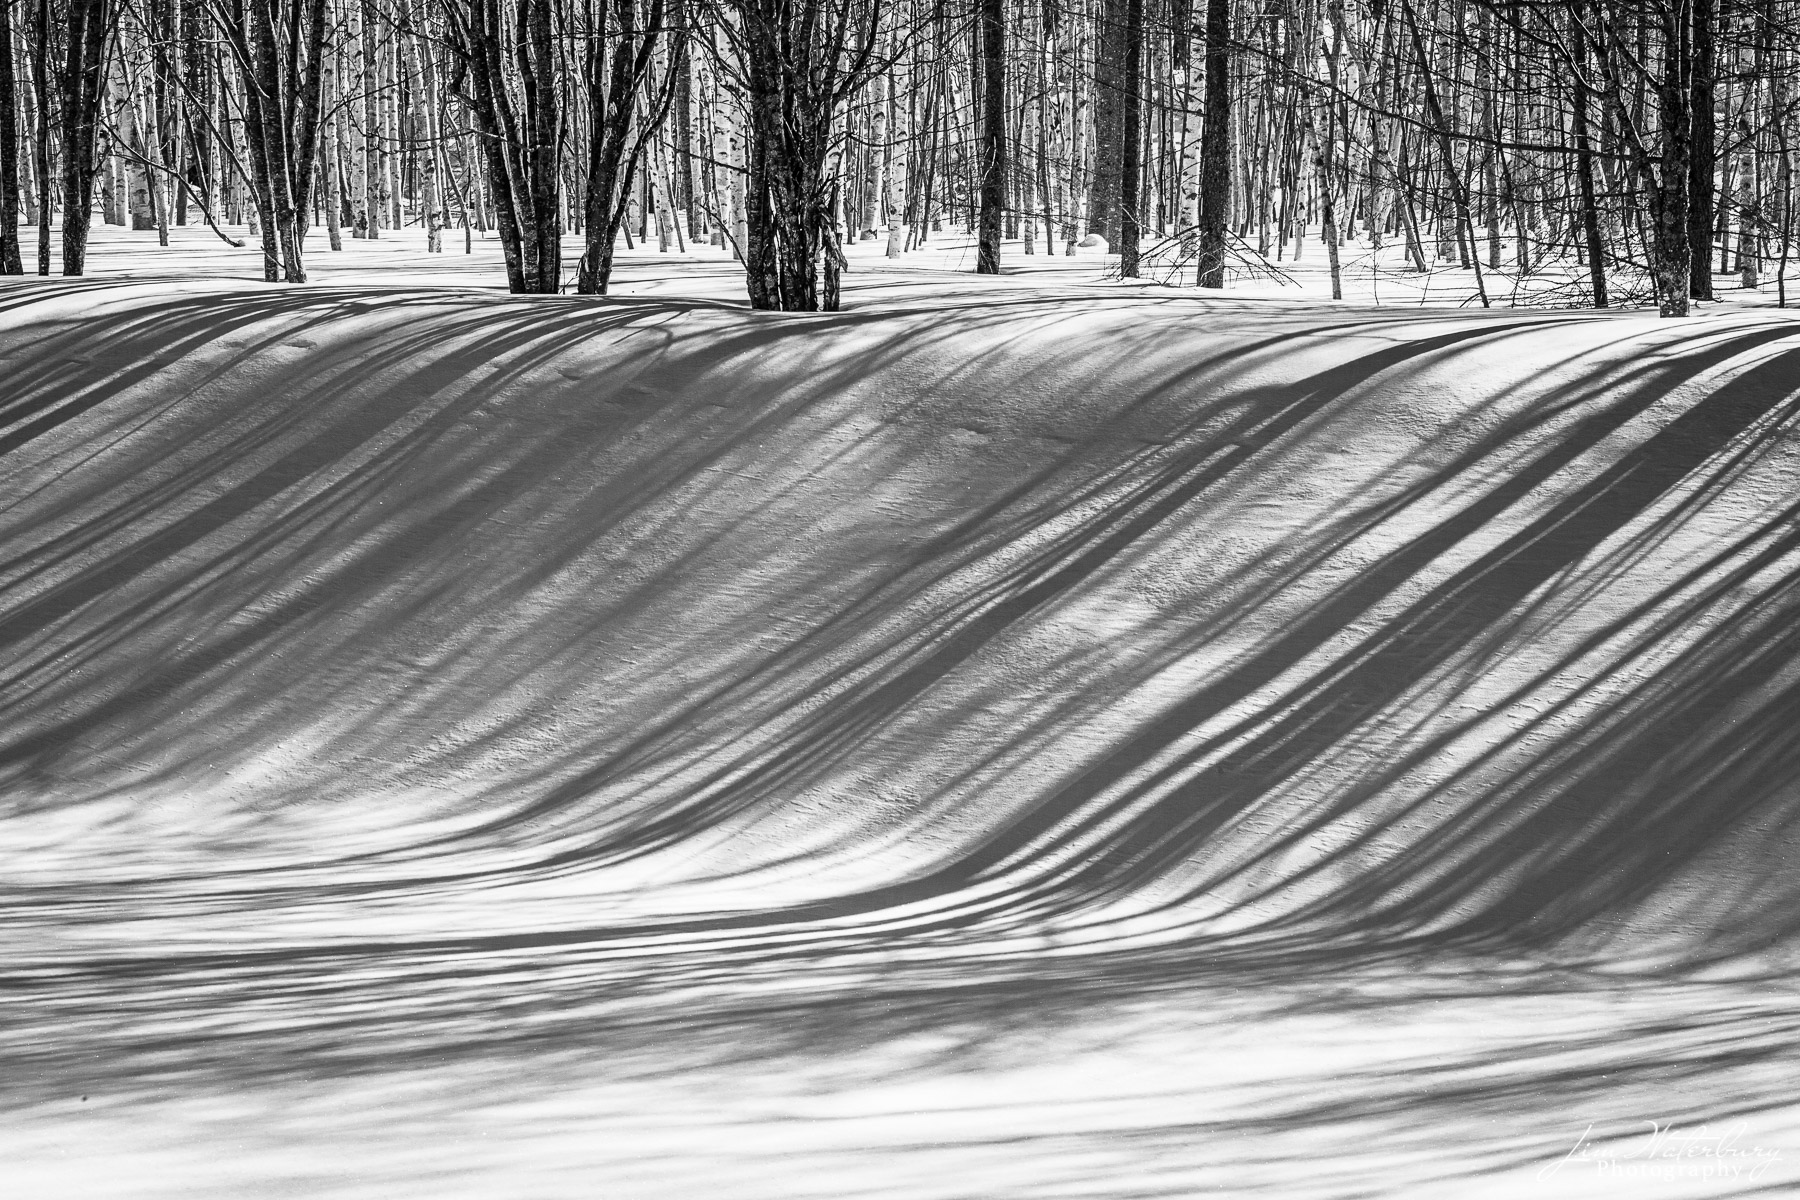 Black & white image of trees and their long shadows on the hillside covered in snow, in Hokkaido, Japan in winter.